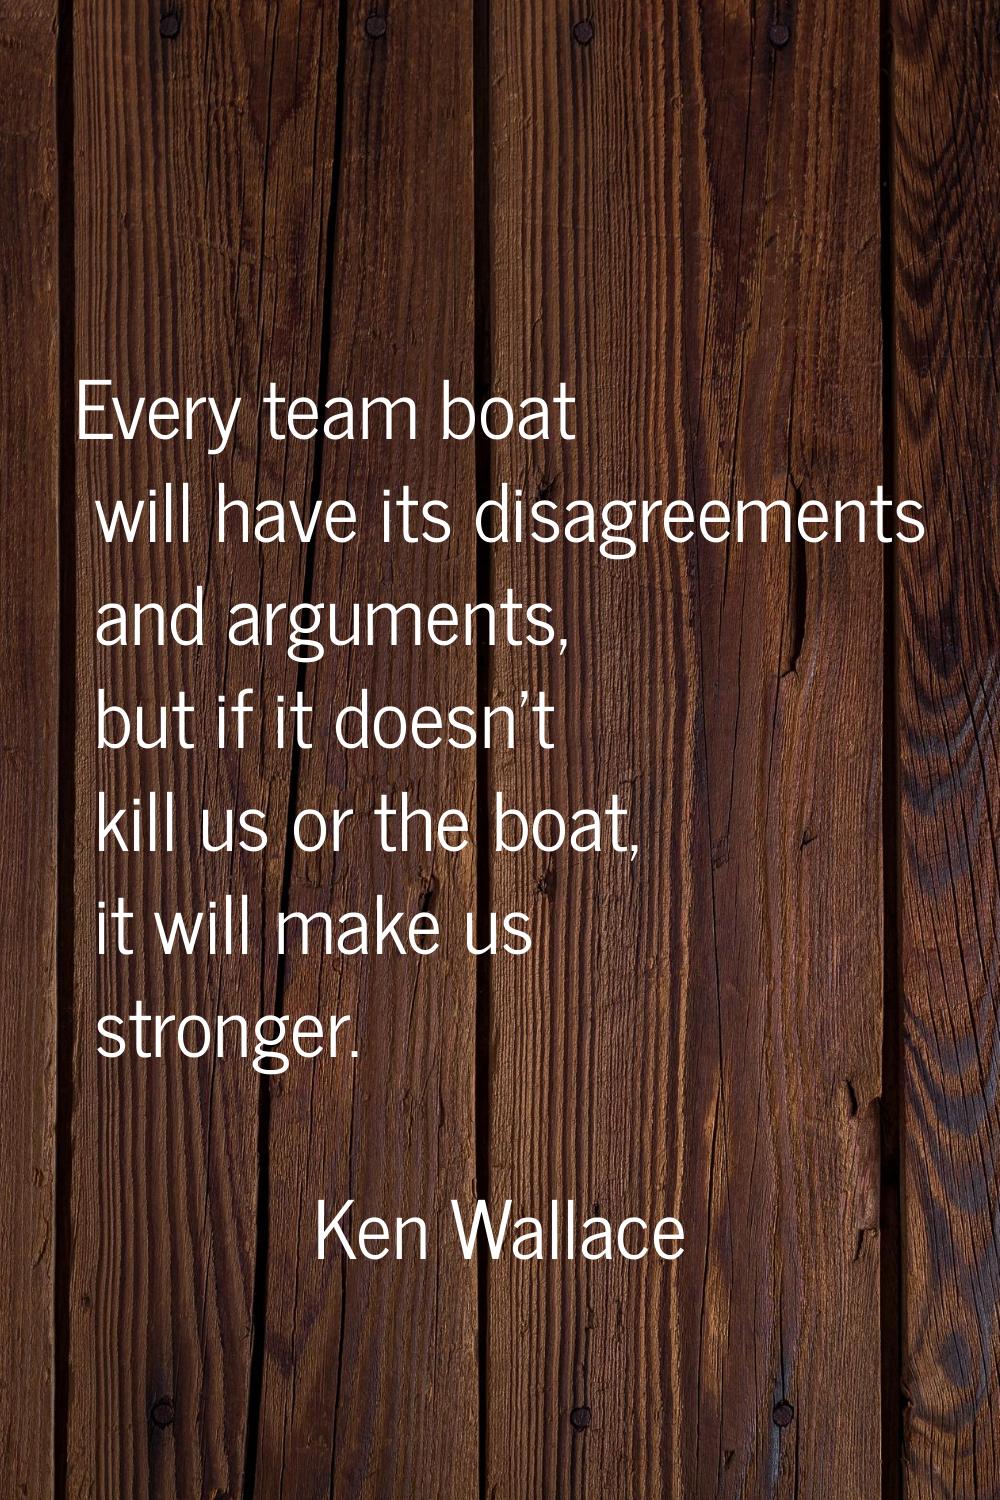 Every team boat will have its disagreements and arguments, but if it doesn't kill us or the boat, i